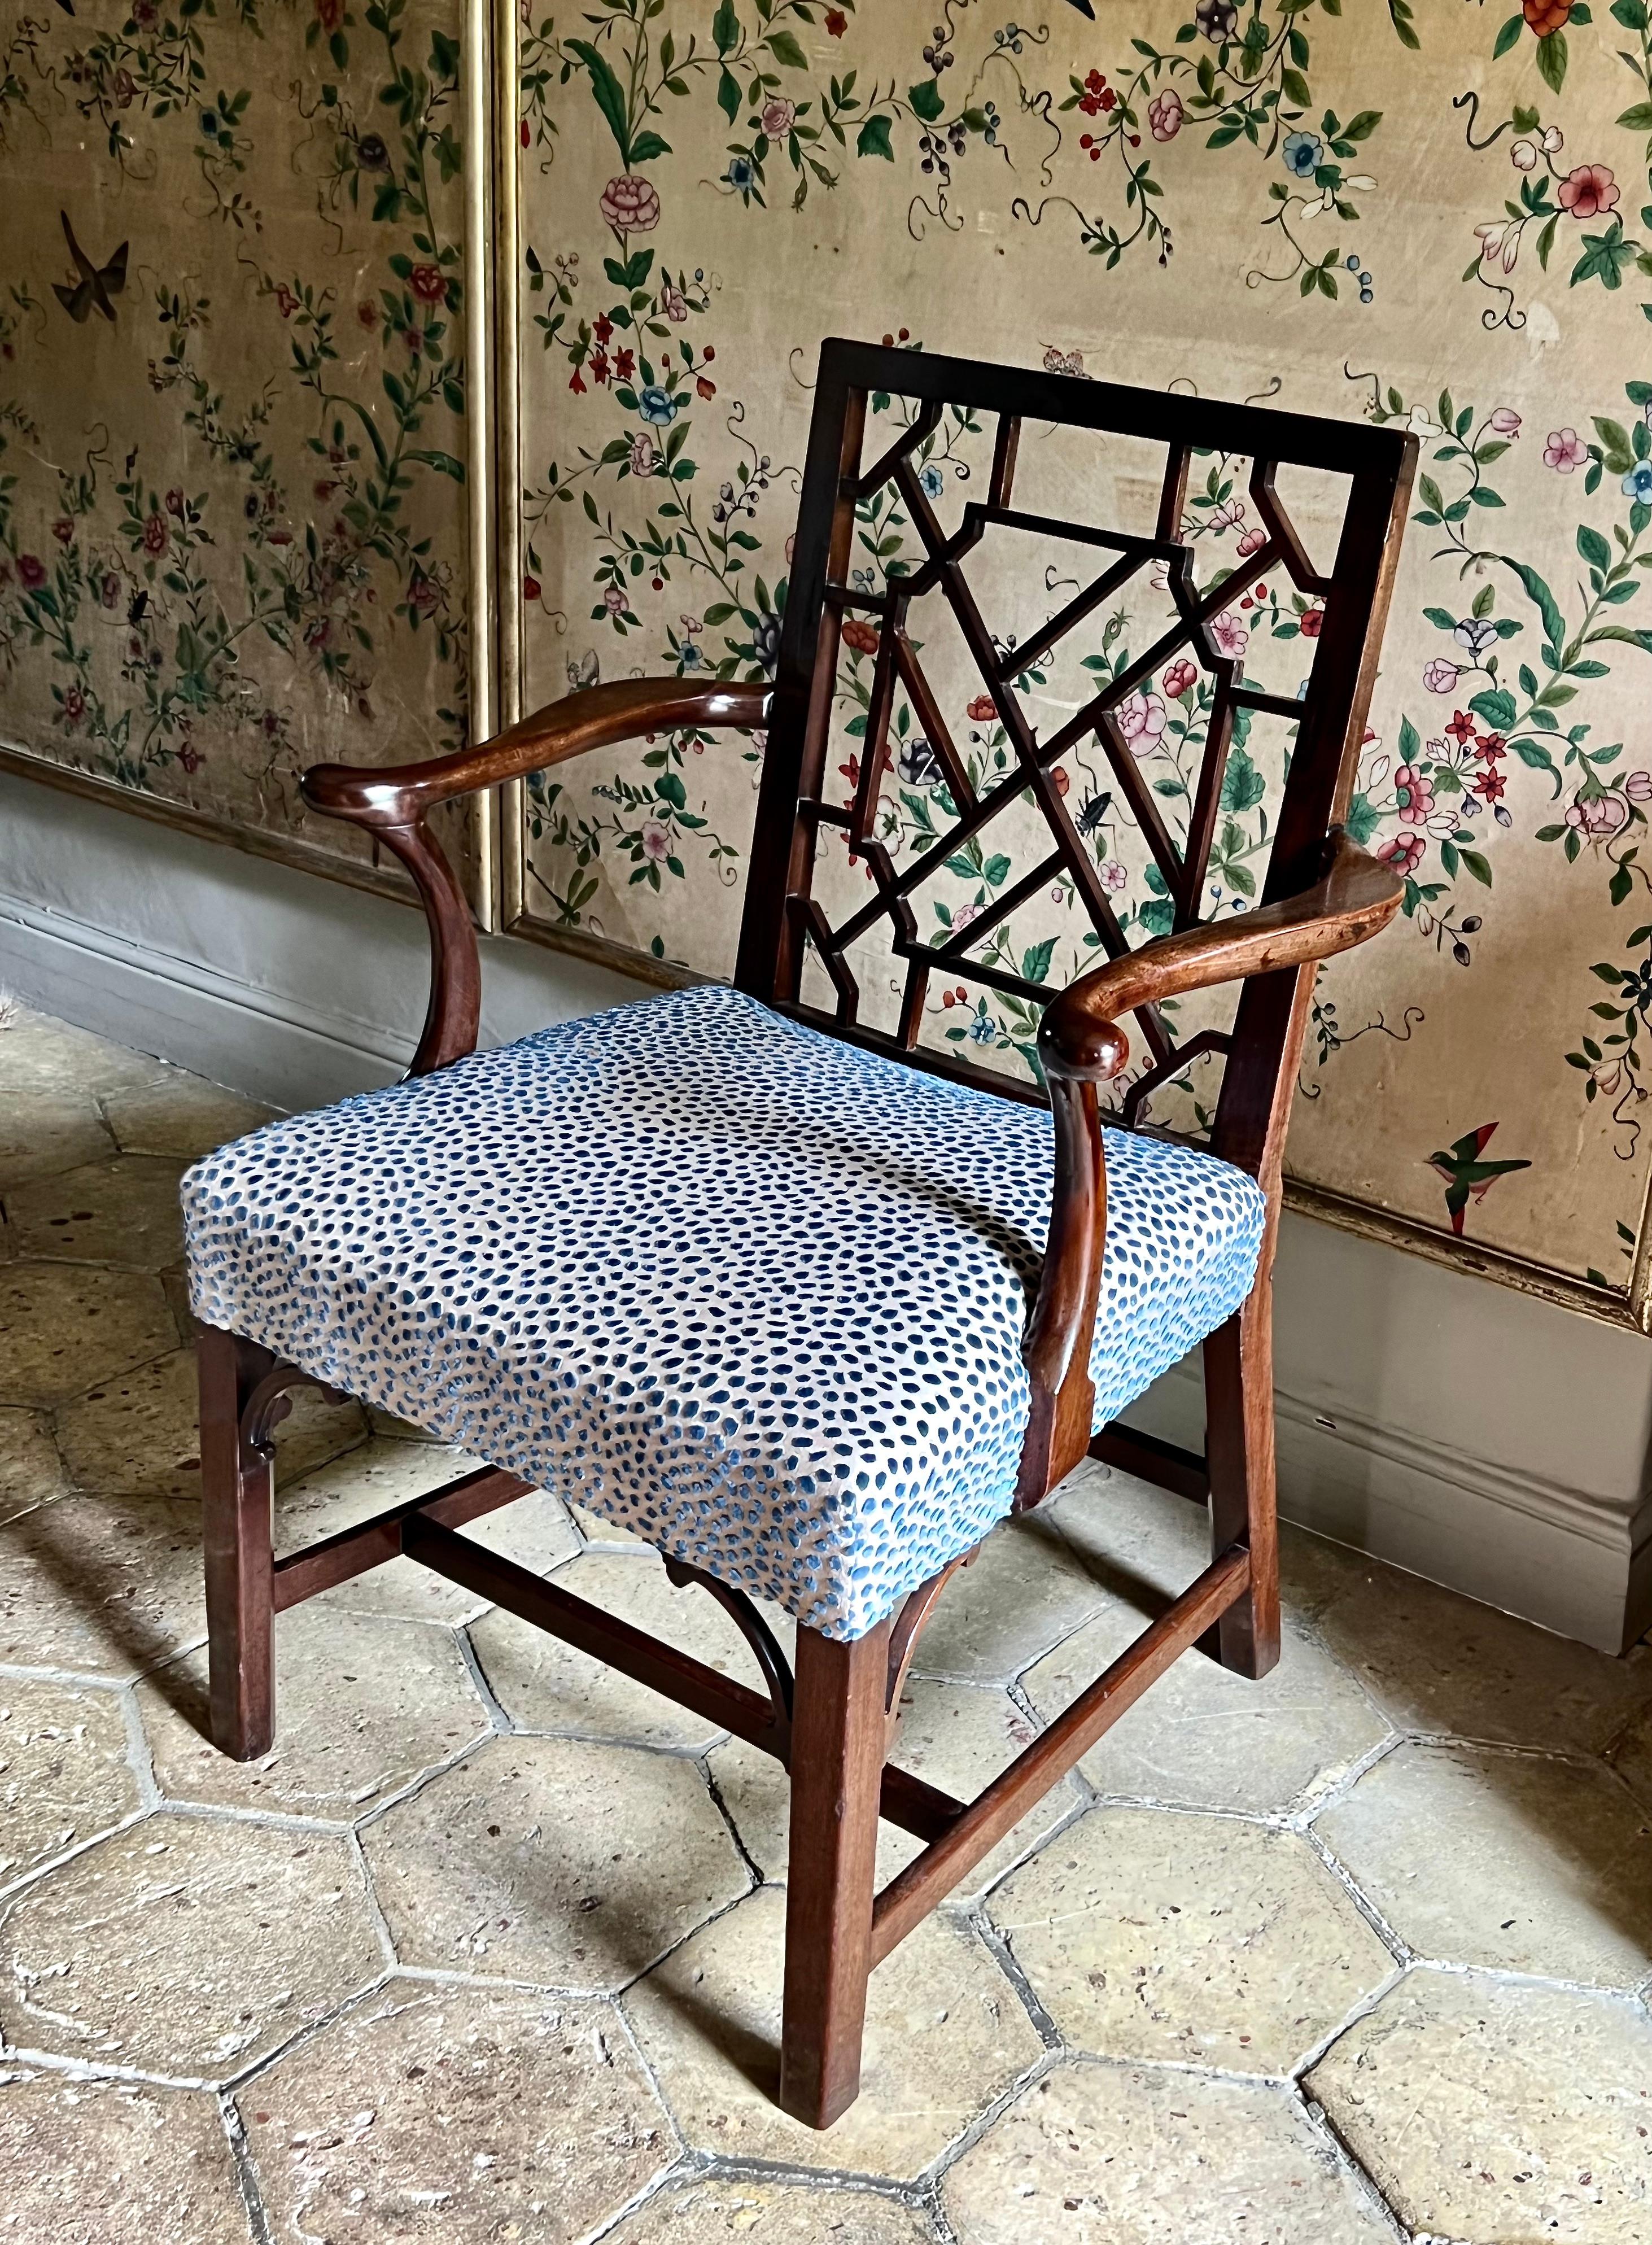 A rare 18th-century mahogany Cockpen armchair. George III period, ca 1762.

A stylish antique Cockpen armchair in mahogany. With chinoiserie open-fretwork frame and angle brackets.

Some very minor historic restorations entirely commensurate with